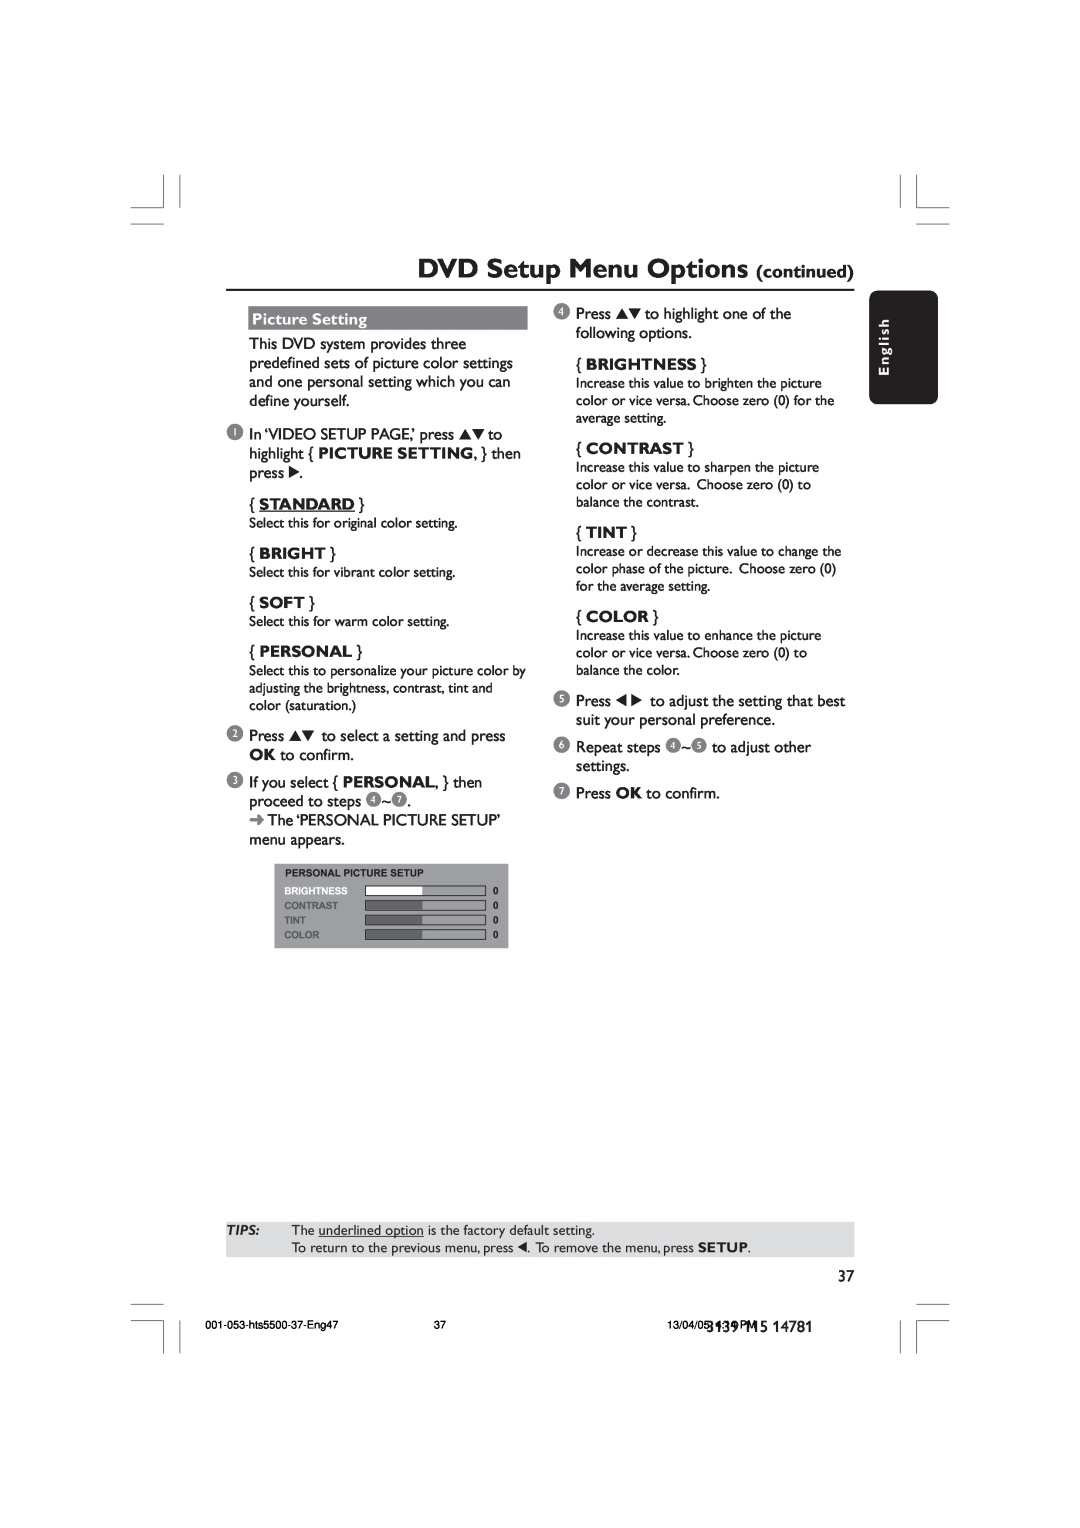 Philips HTS5500C/37B DVD Setup Menu Options continued, Picture Setting, Standard, Brightness, Contrast, Tint, Soft, Color 